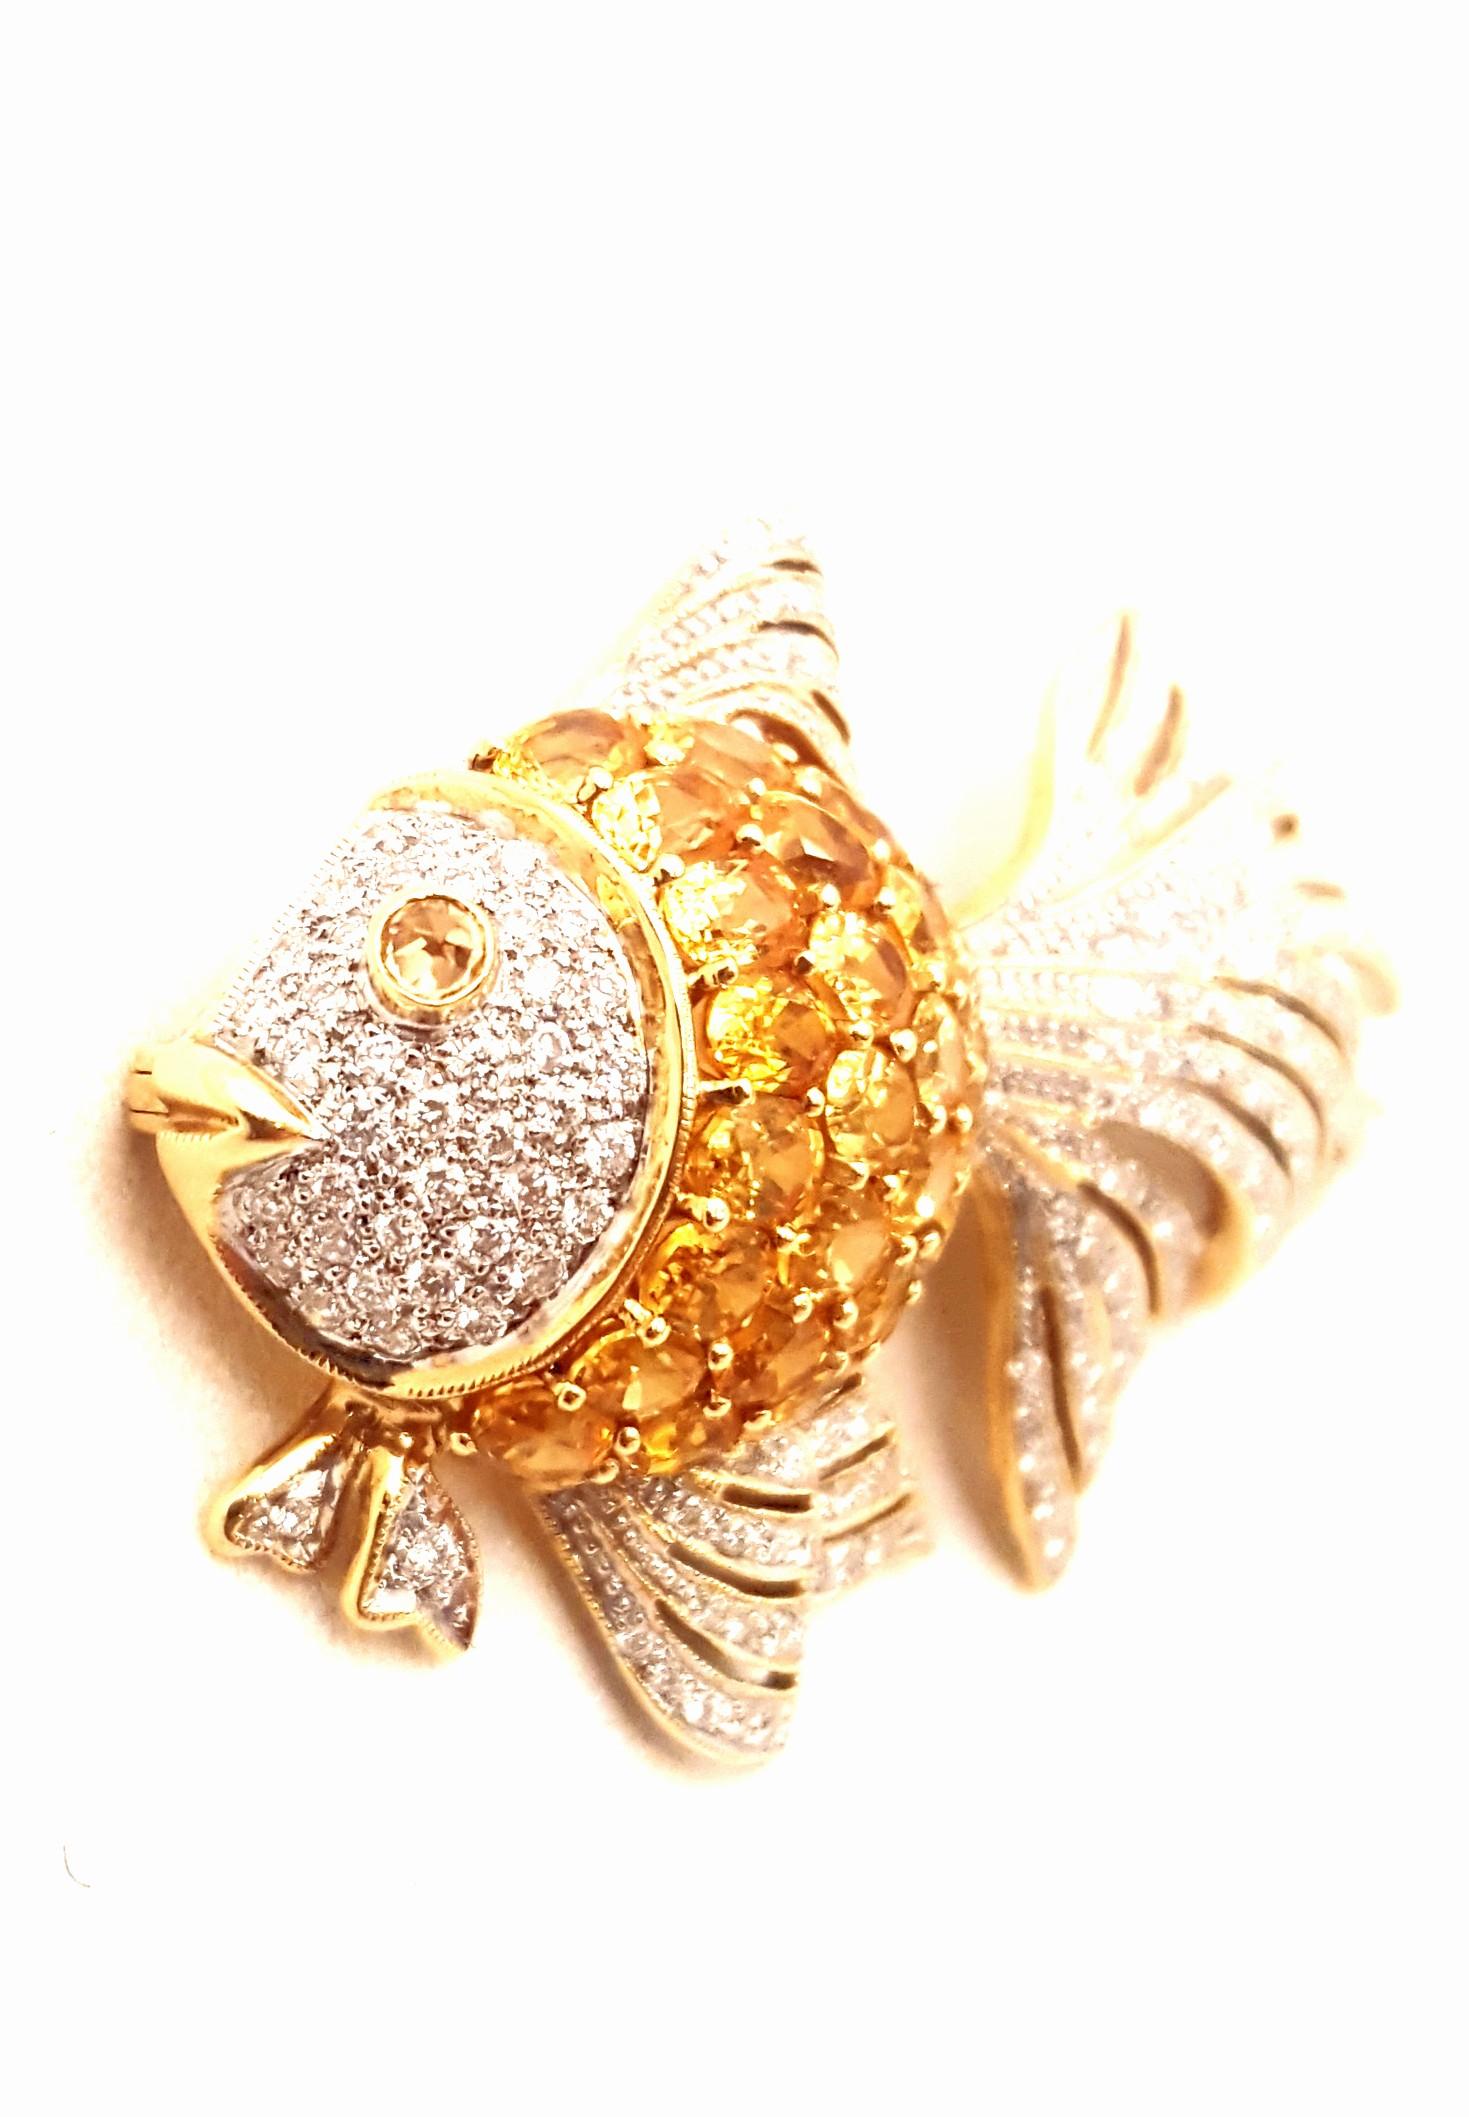 In 2006, this fabulous Fish sold at Neiman Marcus for $12000!  Not so today!  Fabricated in 18 karat yellow gold, this fan tail beauty boasts a body bursting with bright oval yellow sapphires with an approximate total weight of 6.00 carats.  A